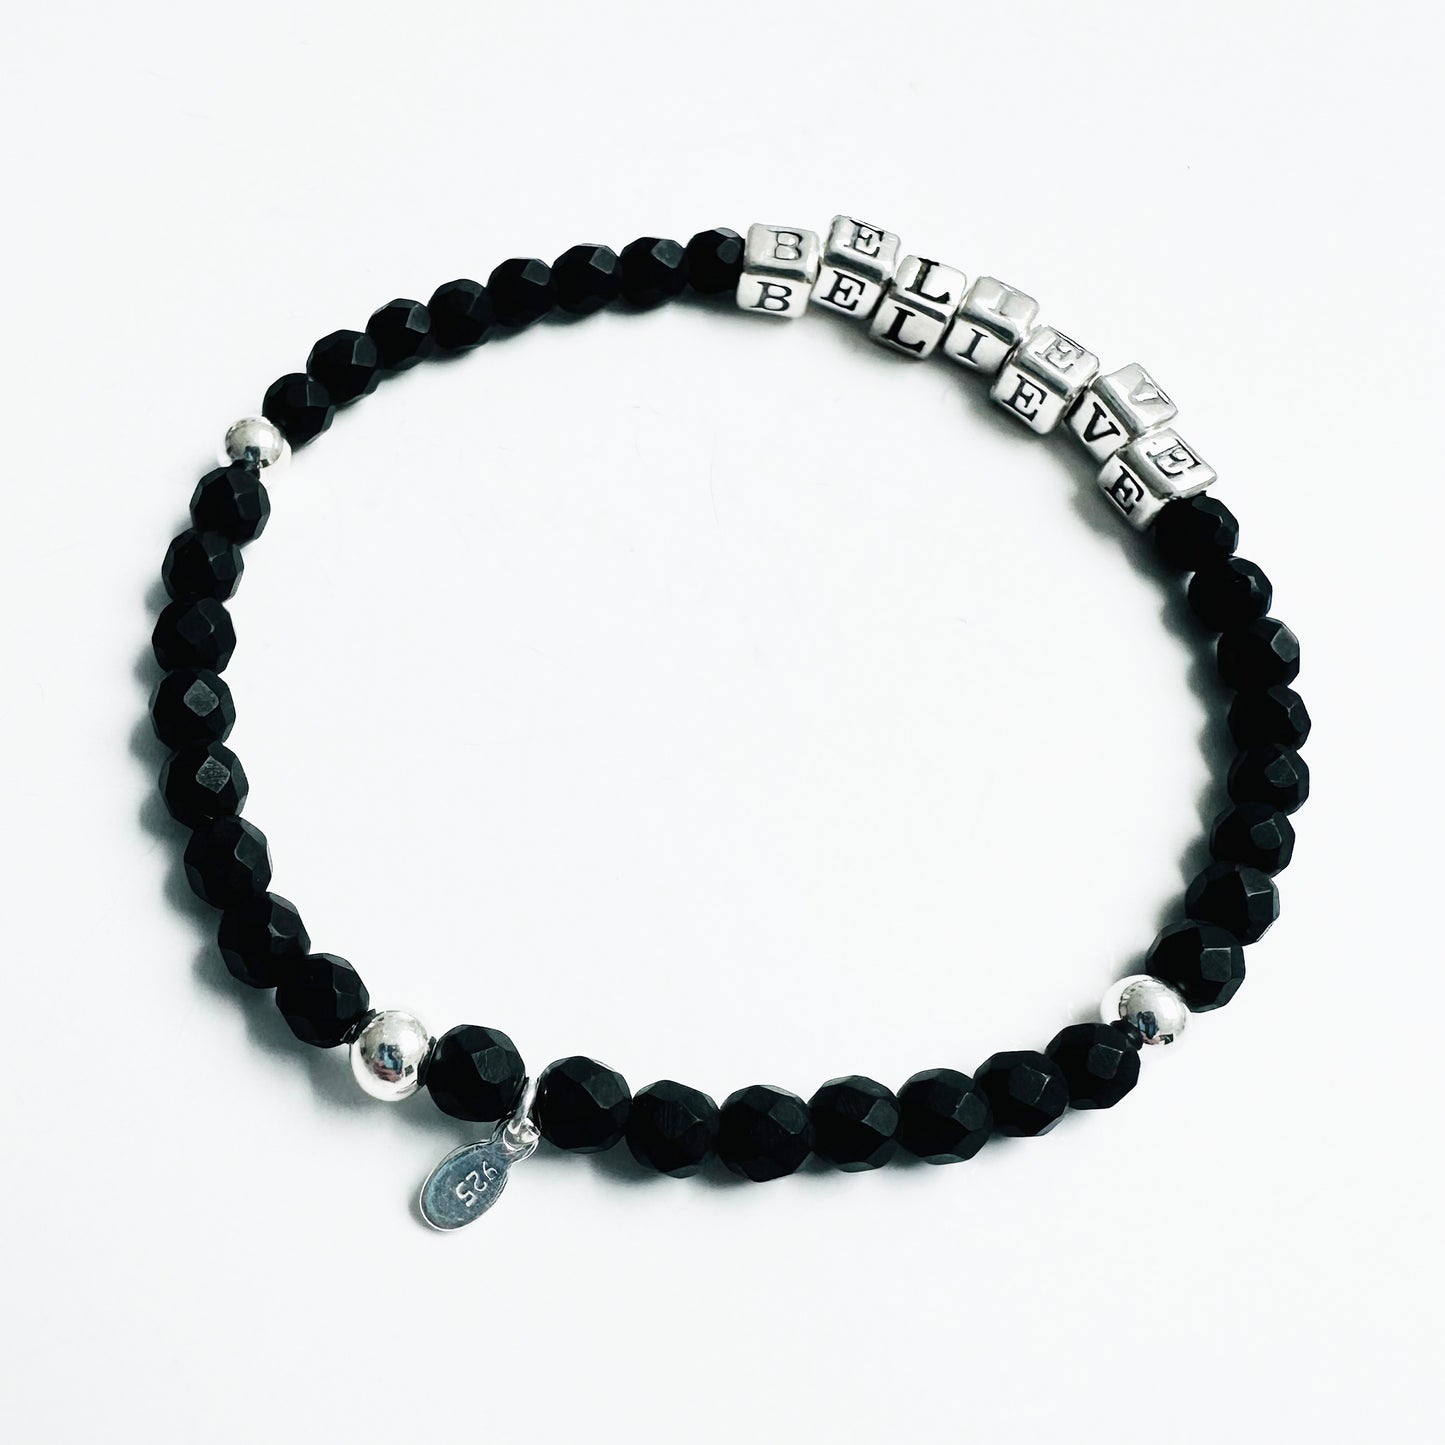 High quality sterling silver and onyx beaded elastic bracelet that spells out the word BELIEVE